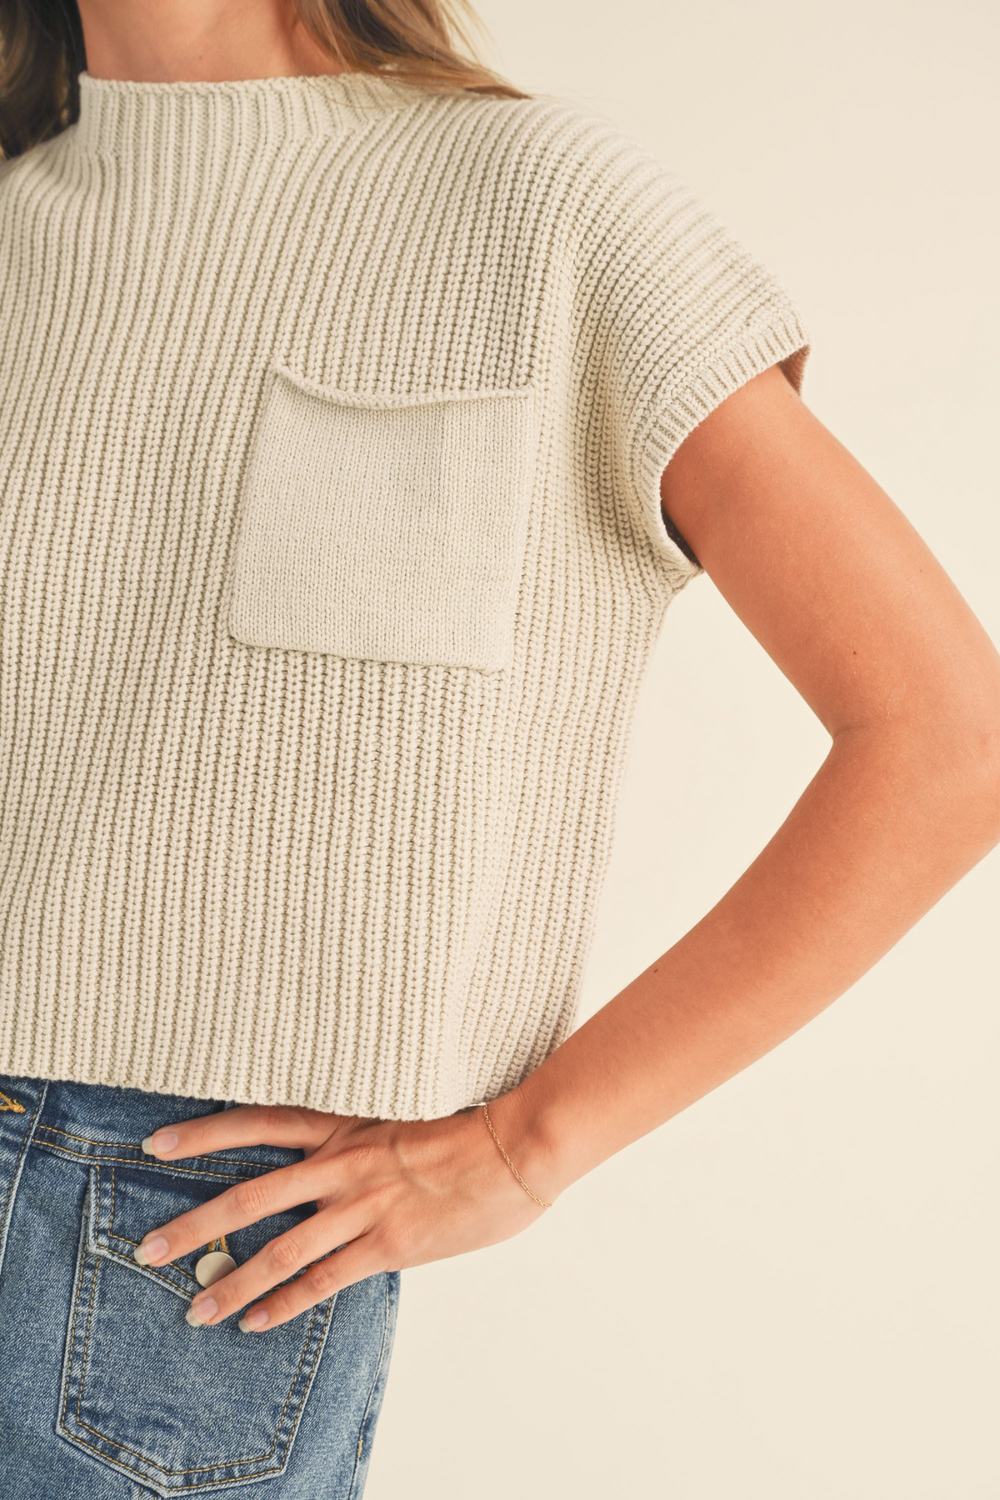 High neck sweater knit top